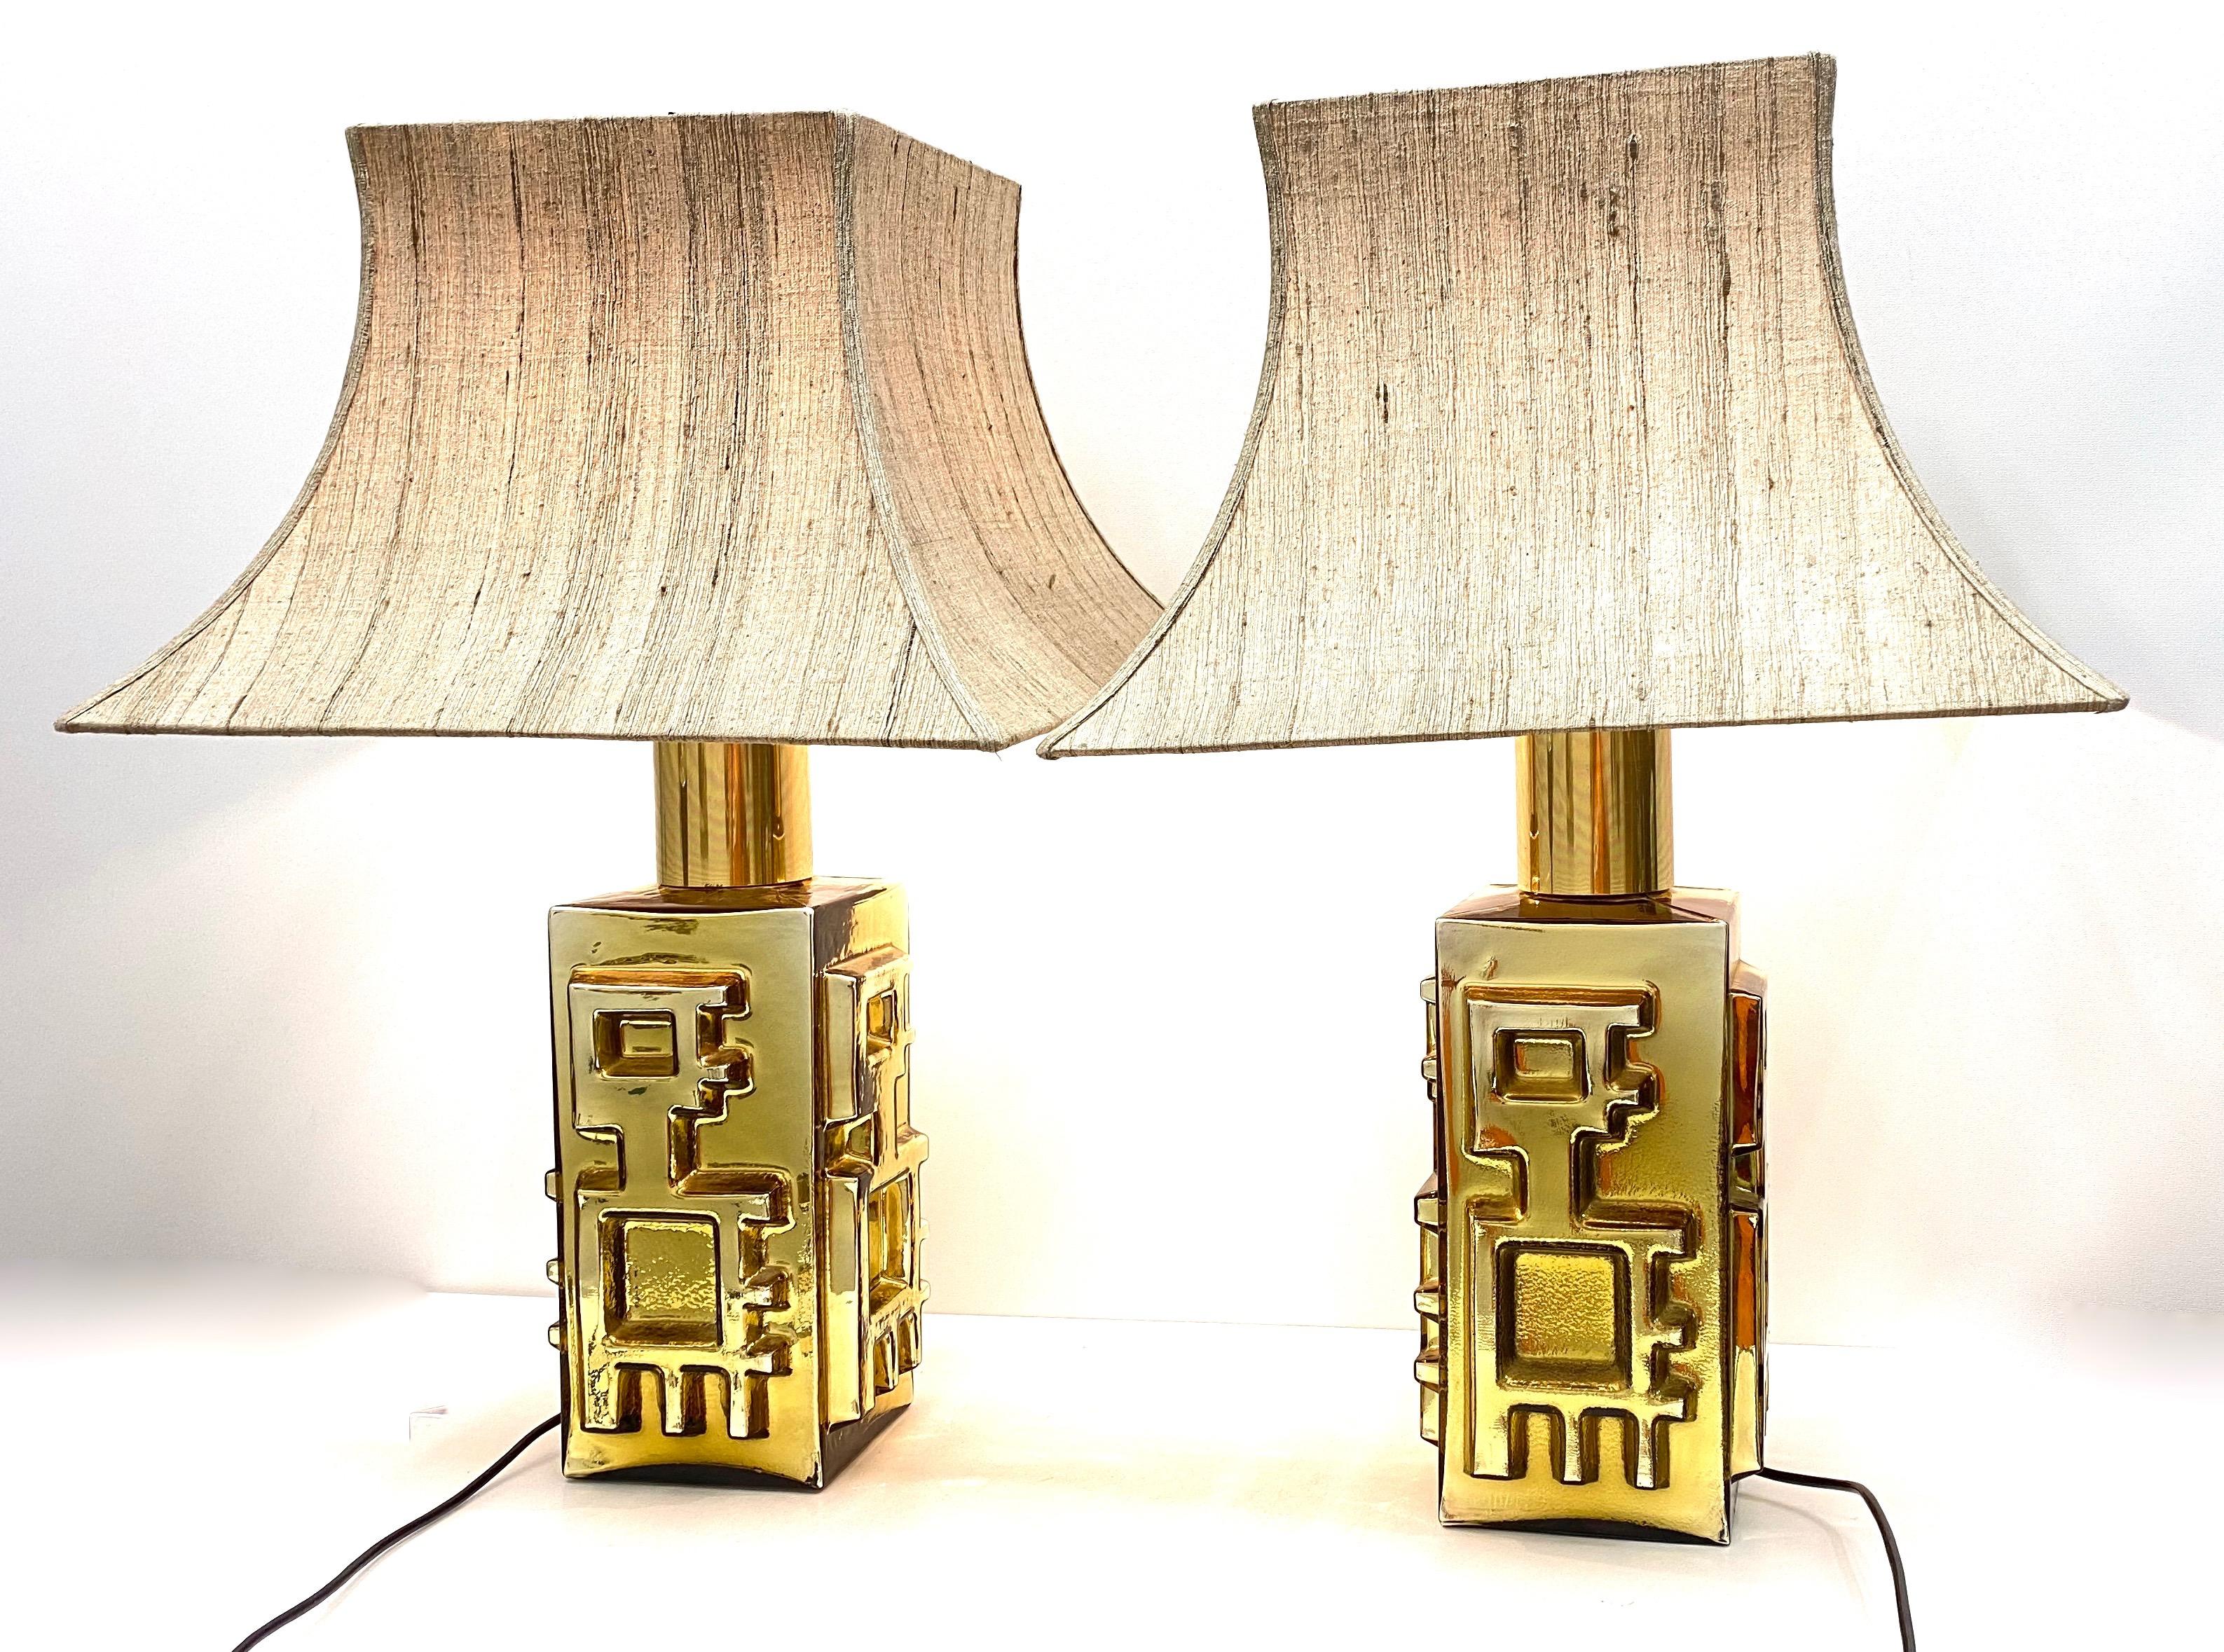 Beautiful pair of large monumental table lamps or side table lamps. Made of glass and brass, in the style of Vetro di Murano, Italy. Each light requires one European E27 / 110 Volt Edison bulb, up to 60 watts. They come without the original shades,